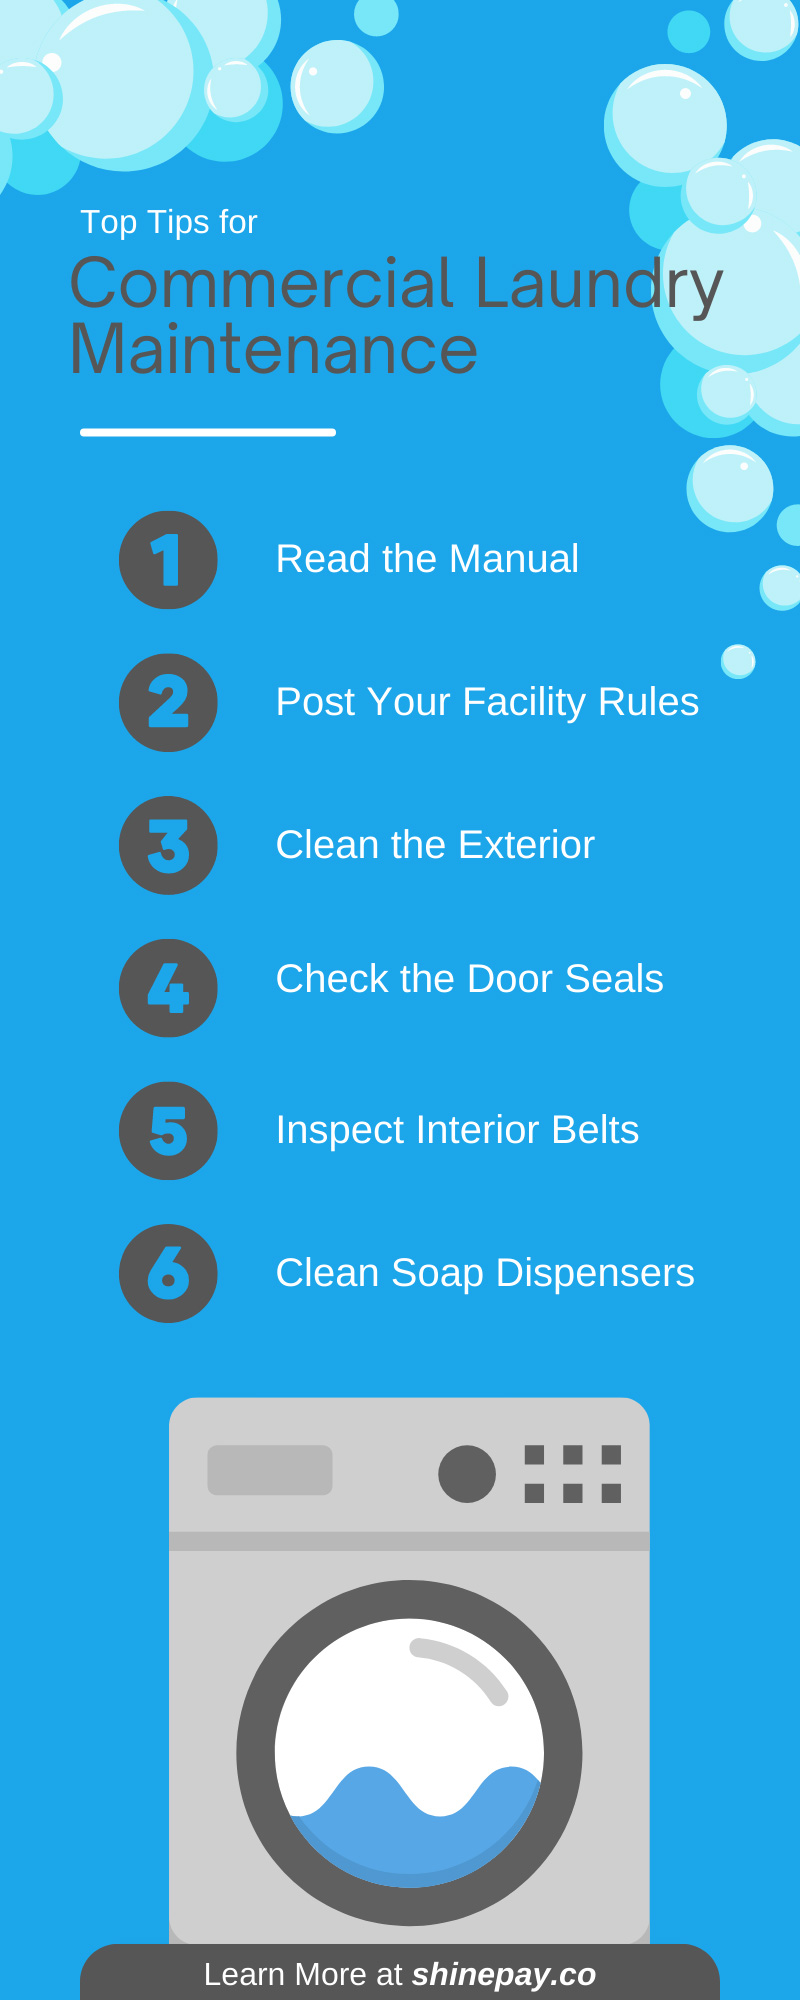 Top 10 Tips for Commercial Laundry Maintenance